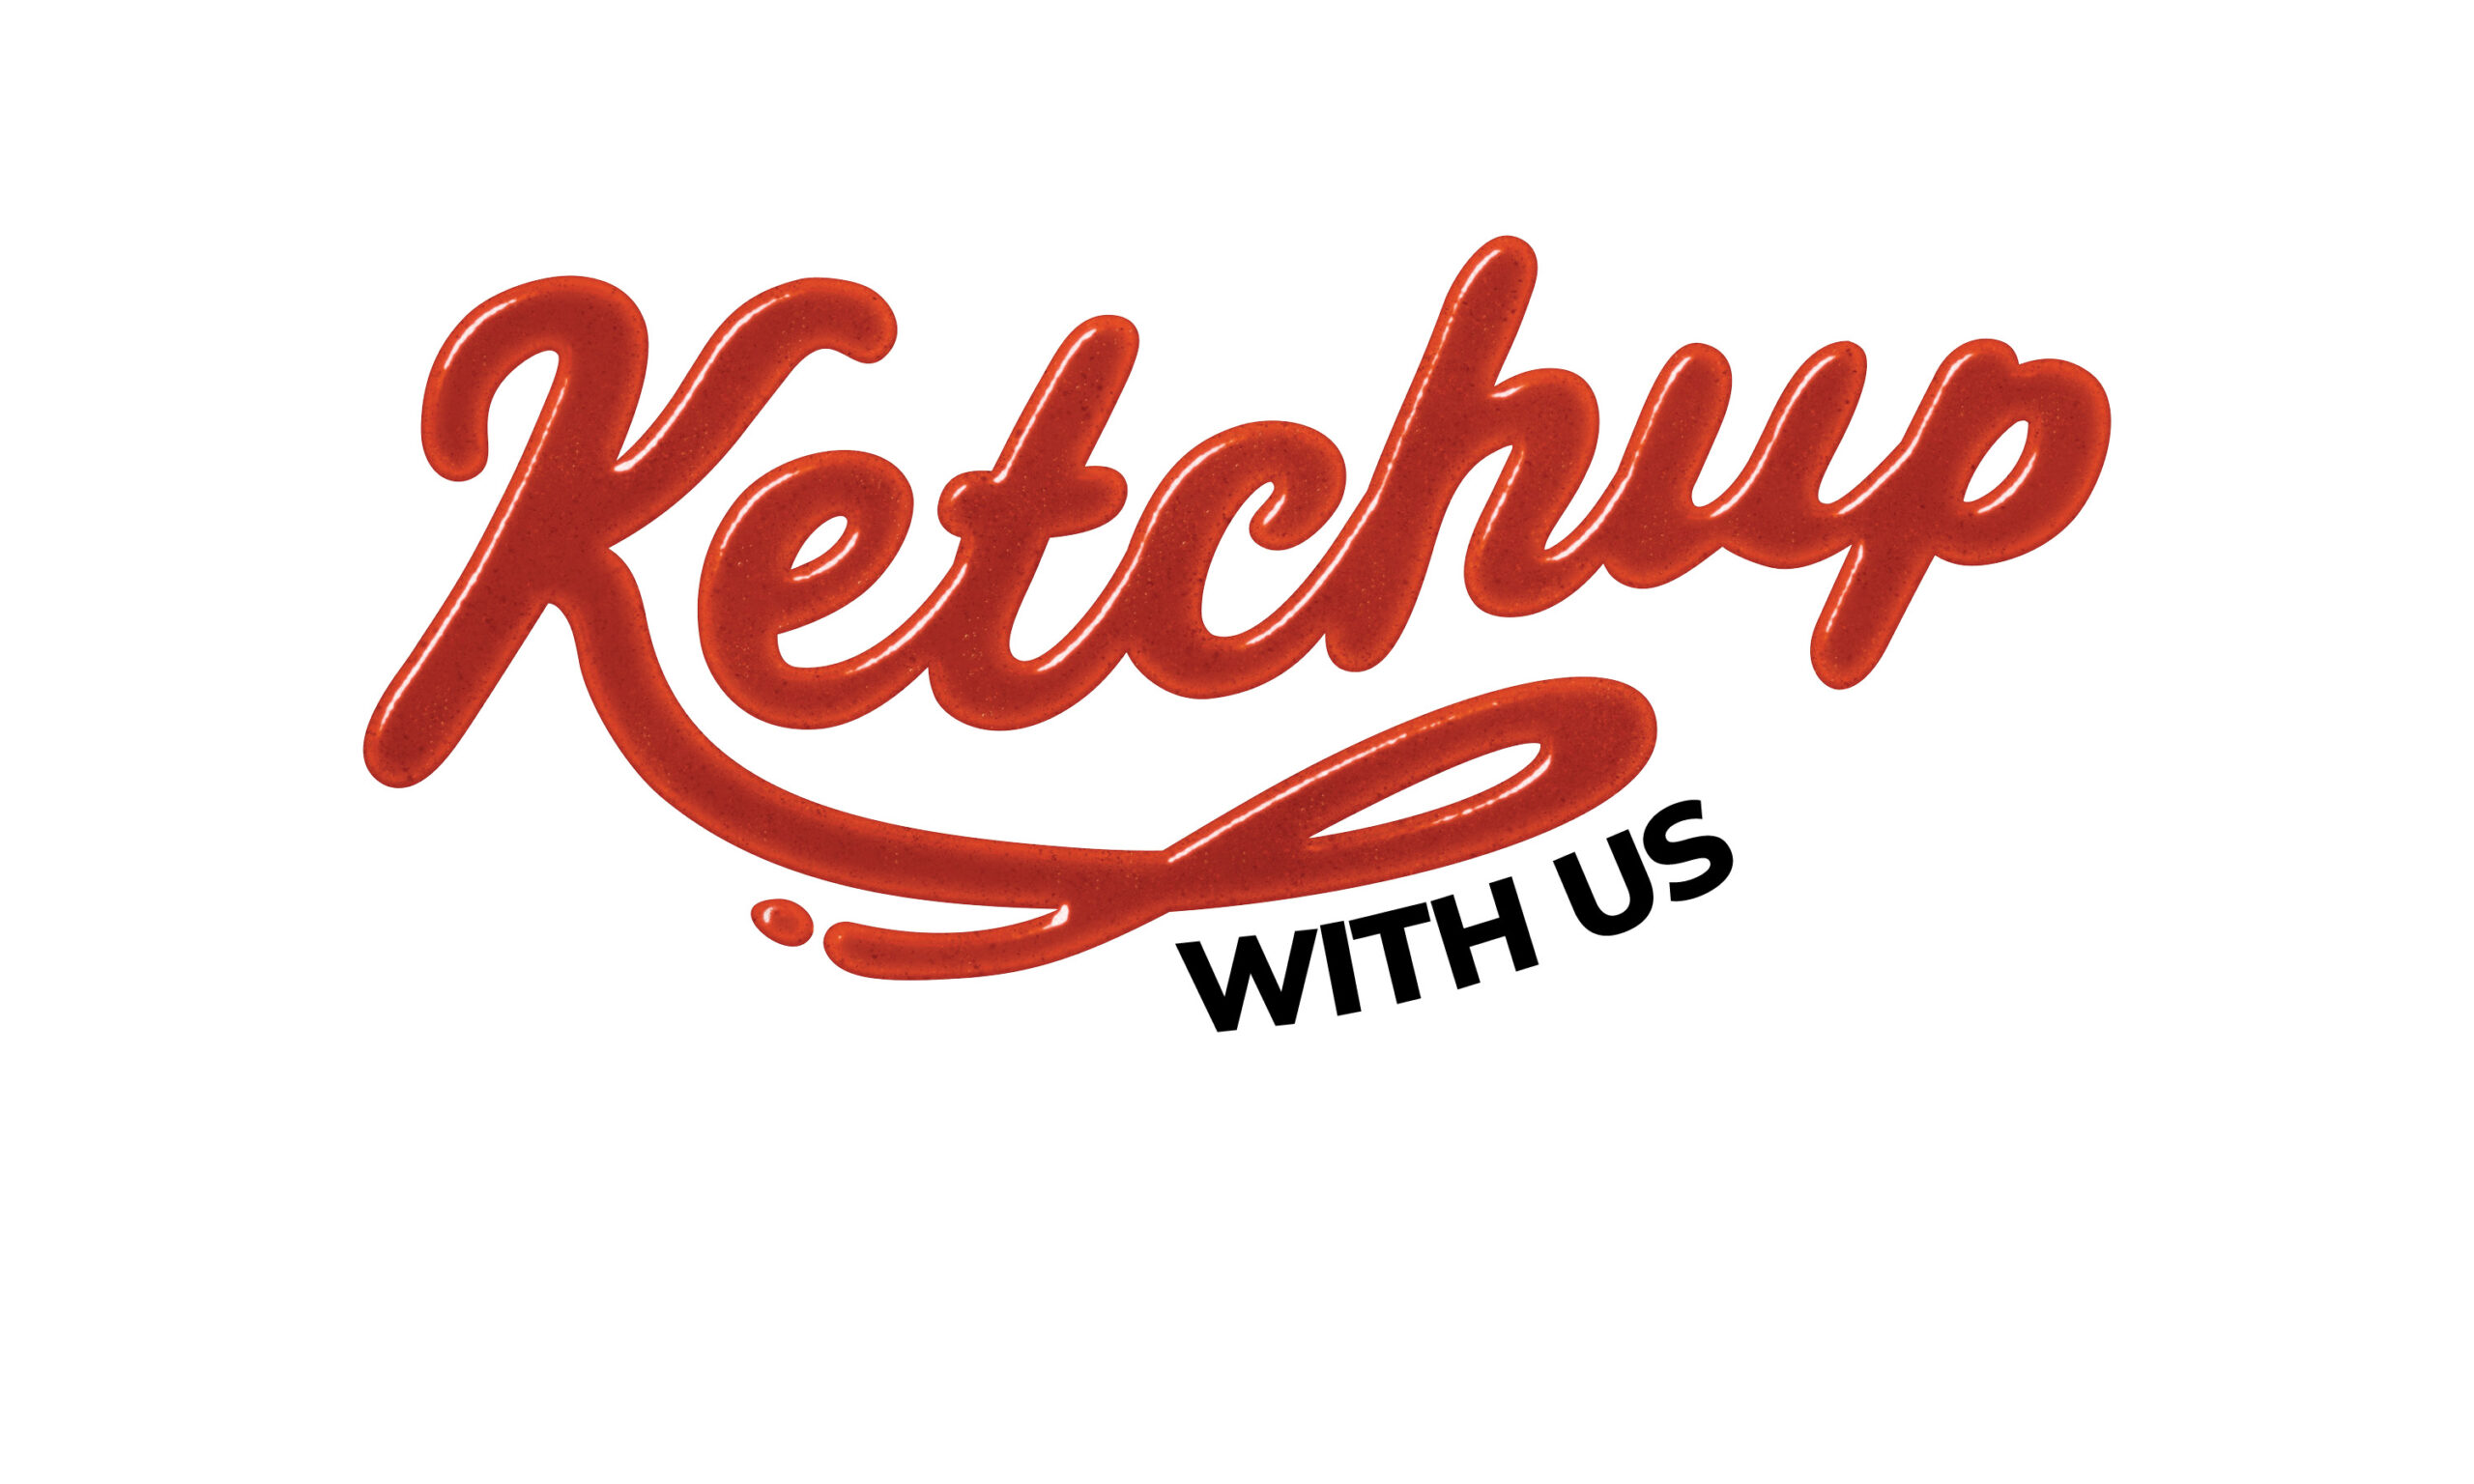 Kagome USA, Newsletter, Ketchup With Us